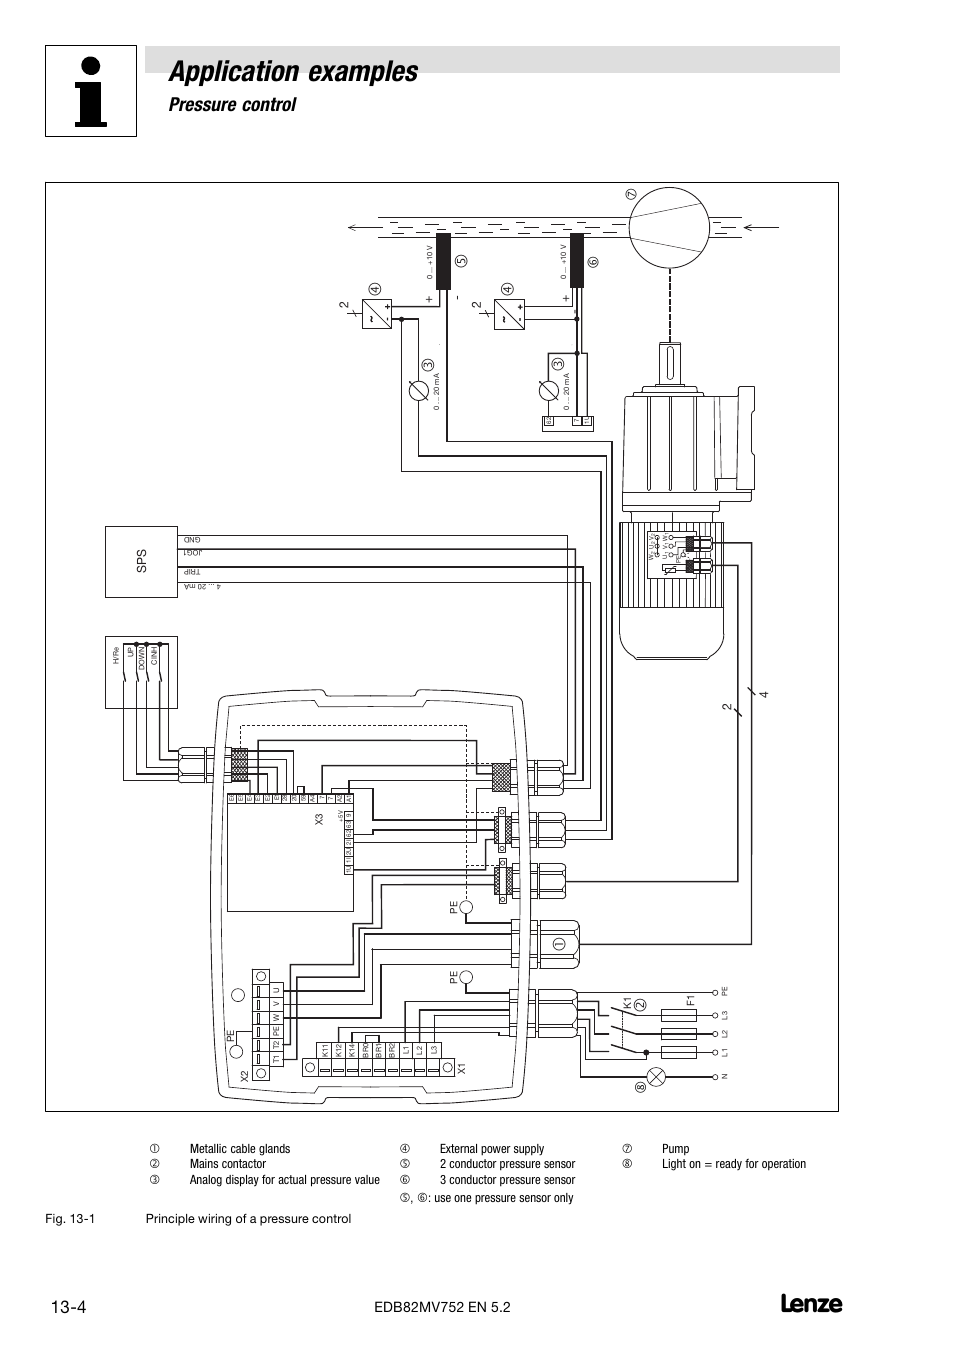 Application examples, Pressure control | Lenze 8200 motec frequency inverter  0.25kW-7.5kW User Manual | Page 189 / 270 | Original mode